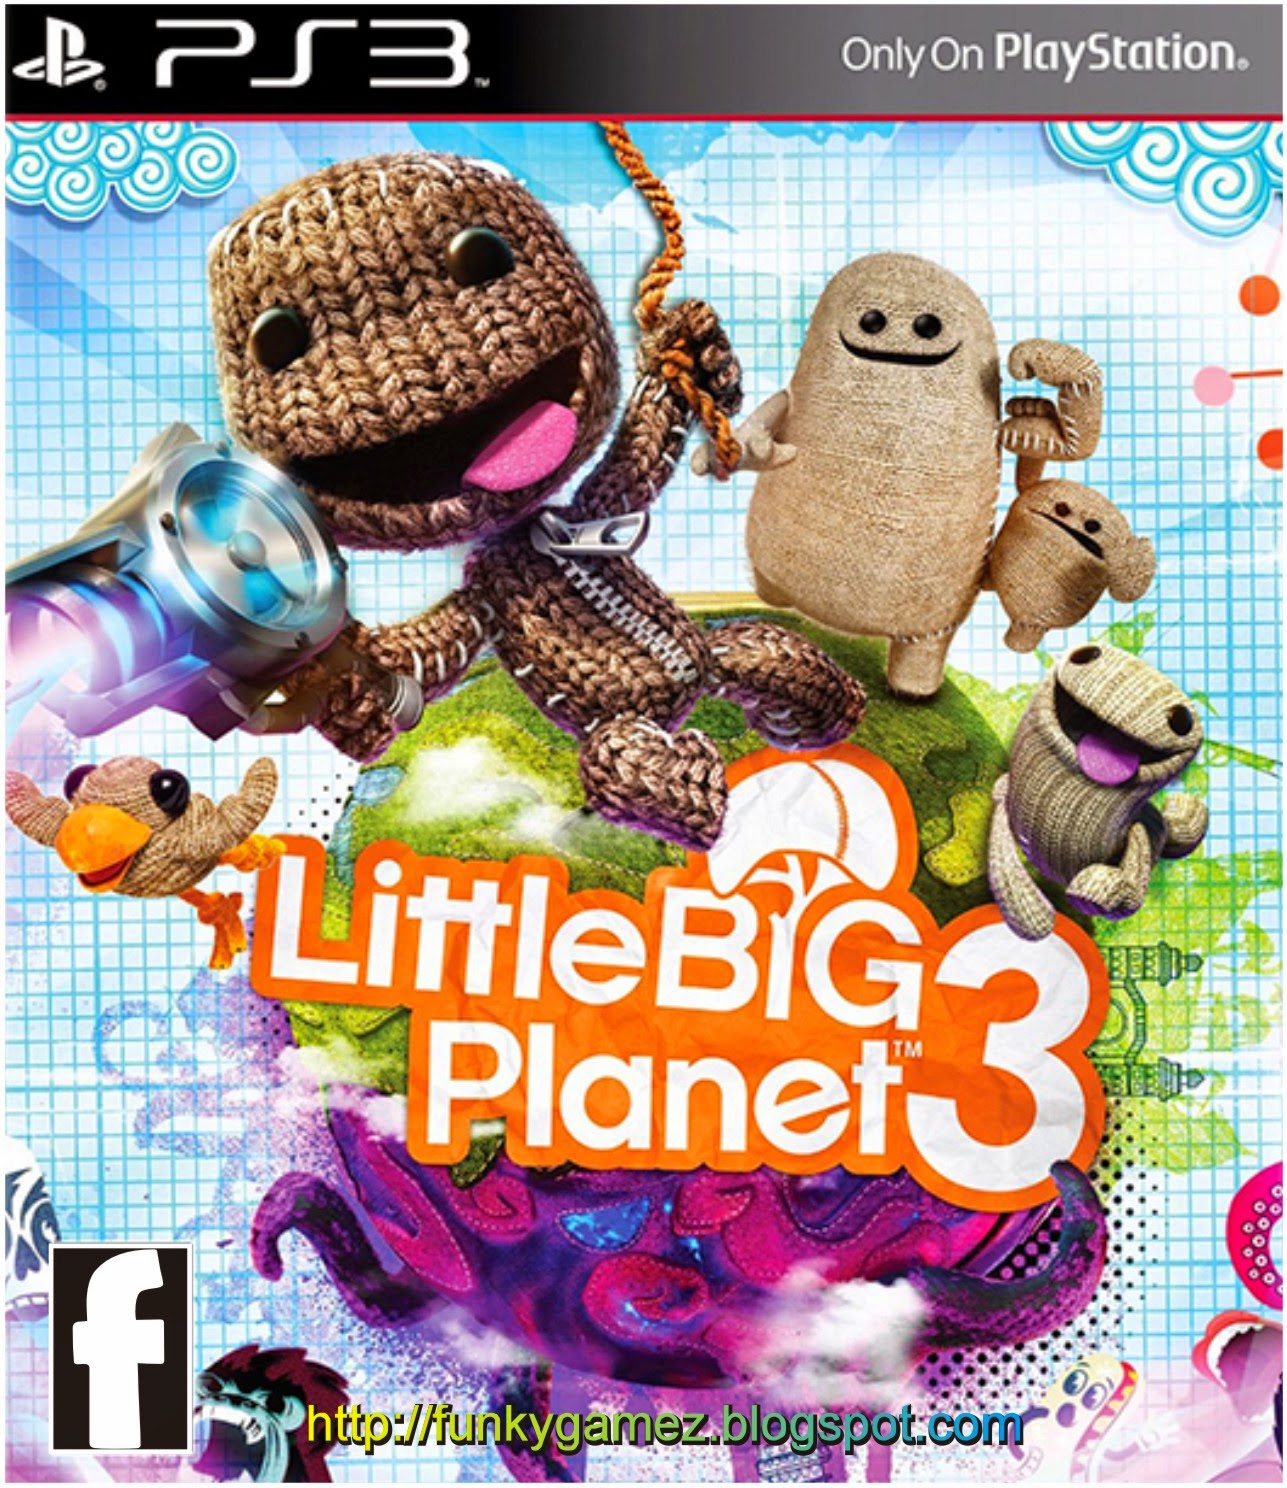 Play Littlebigplanet Karting Game Here - Free Online Games